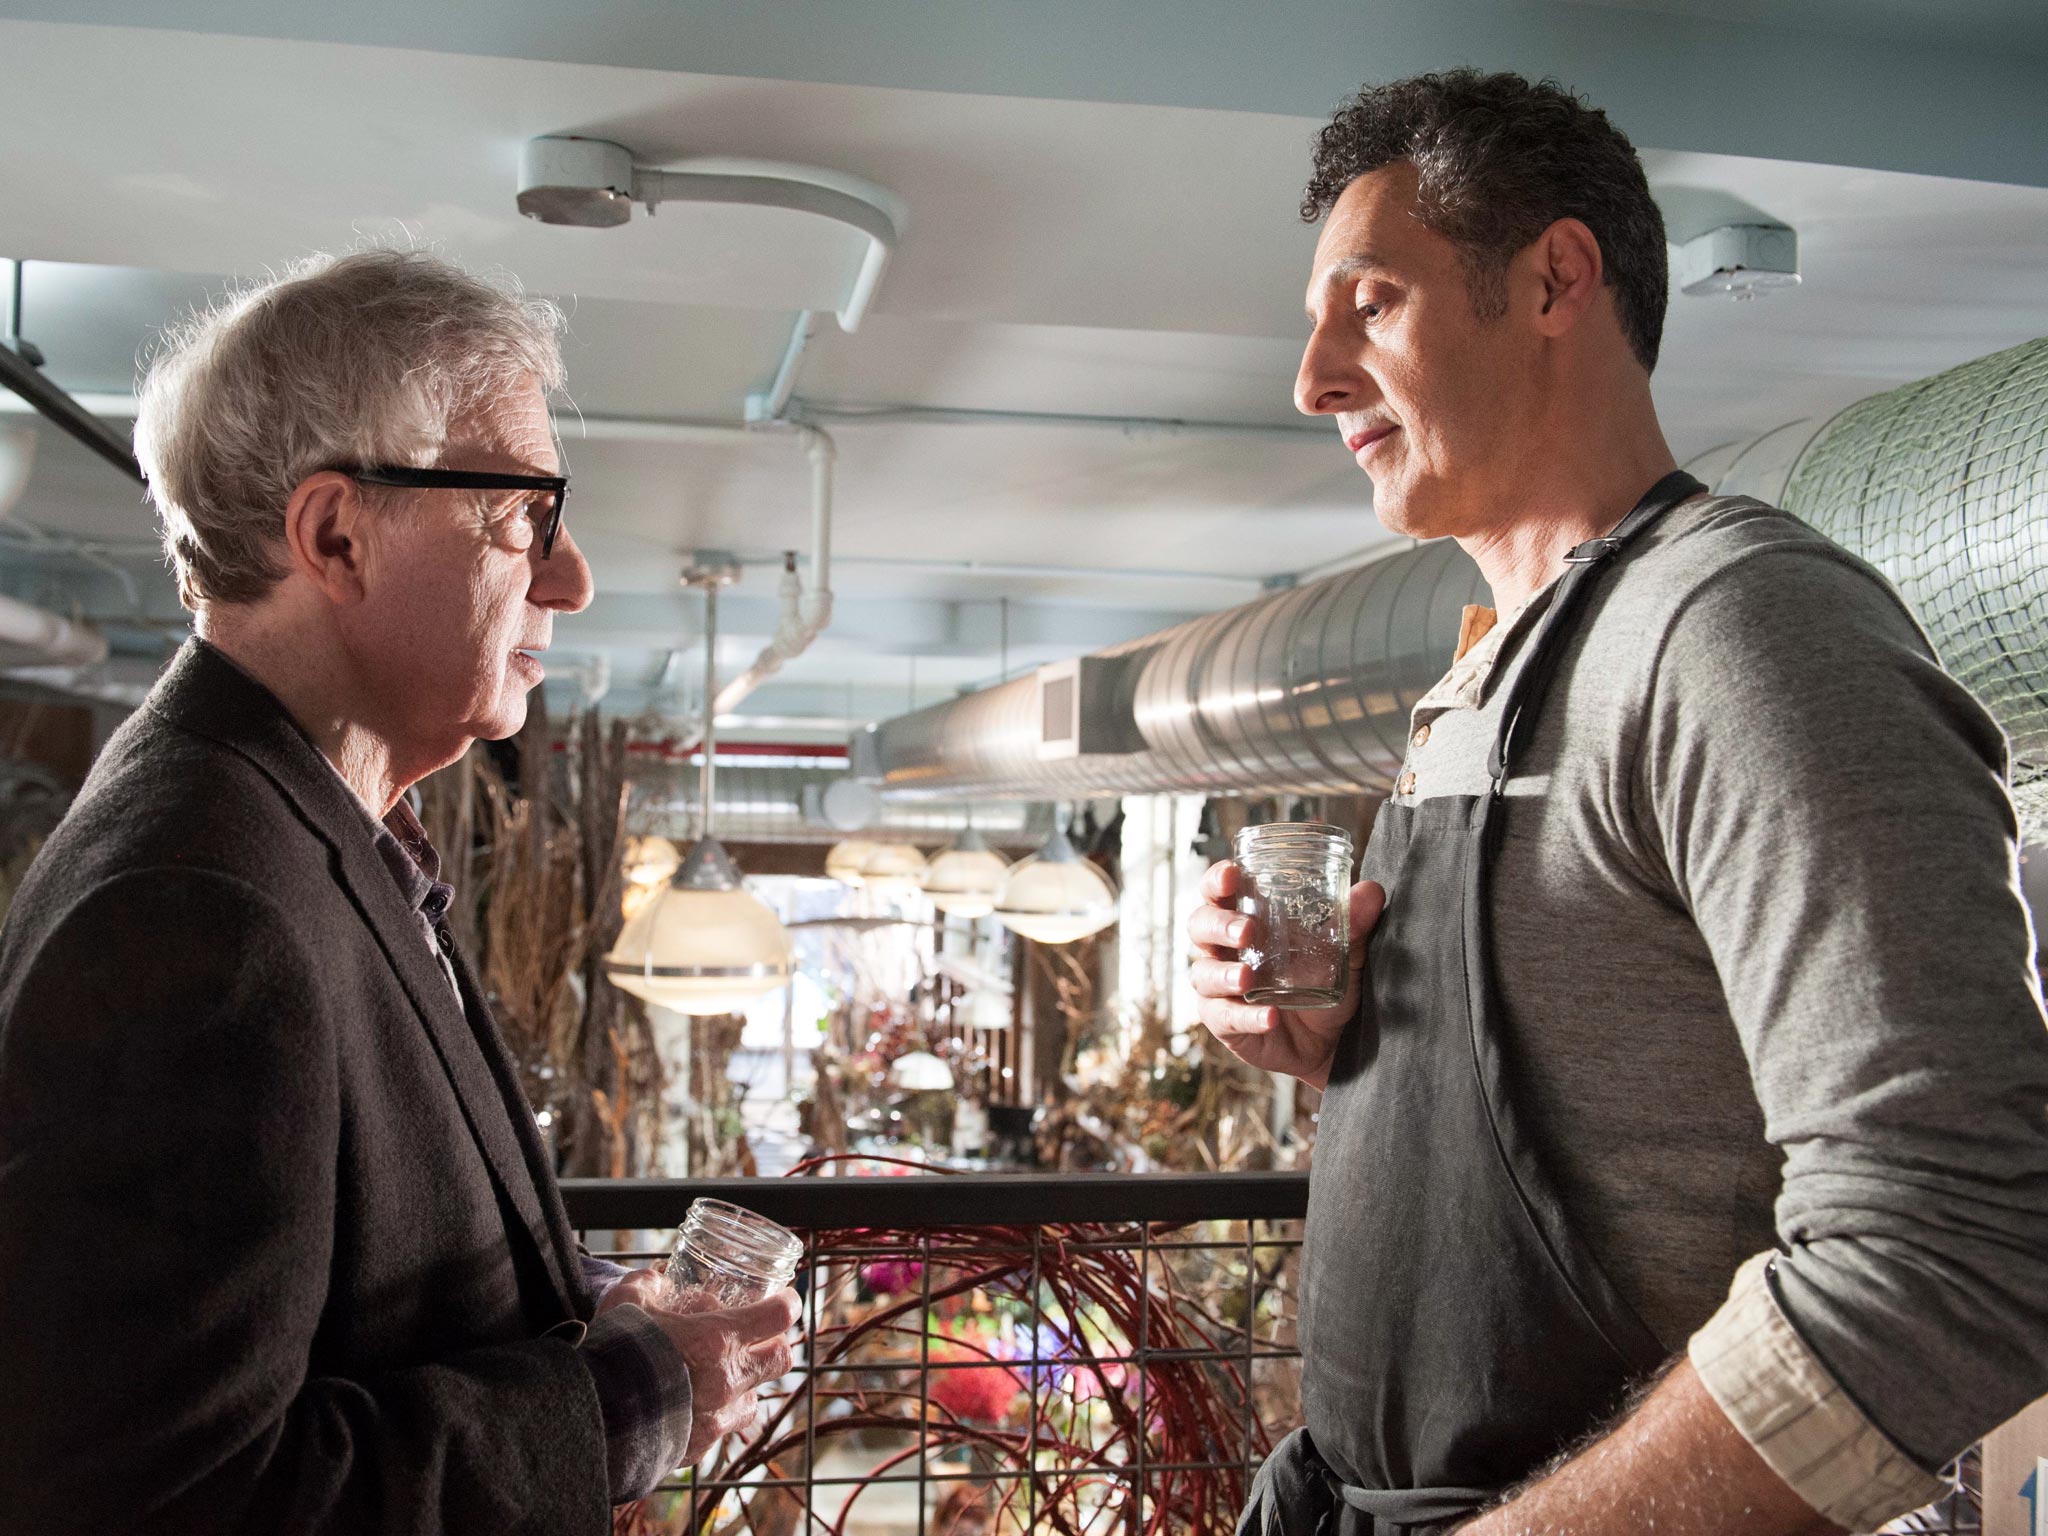 It had to be you: Woody Allen and John Turturro in ‘Fading Gigolo’